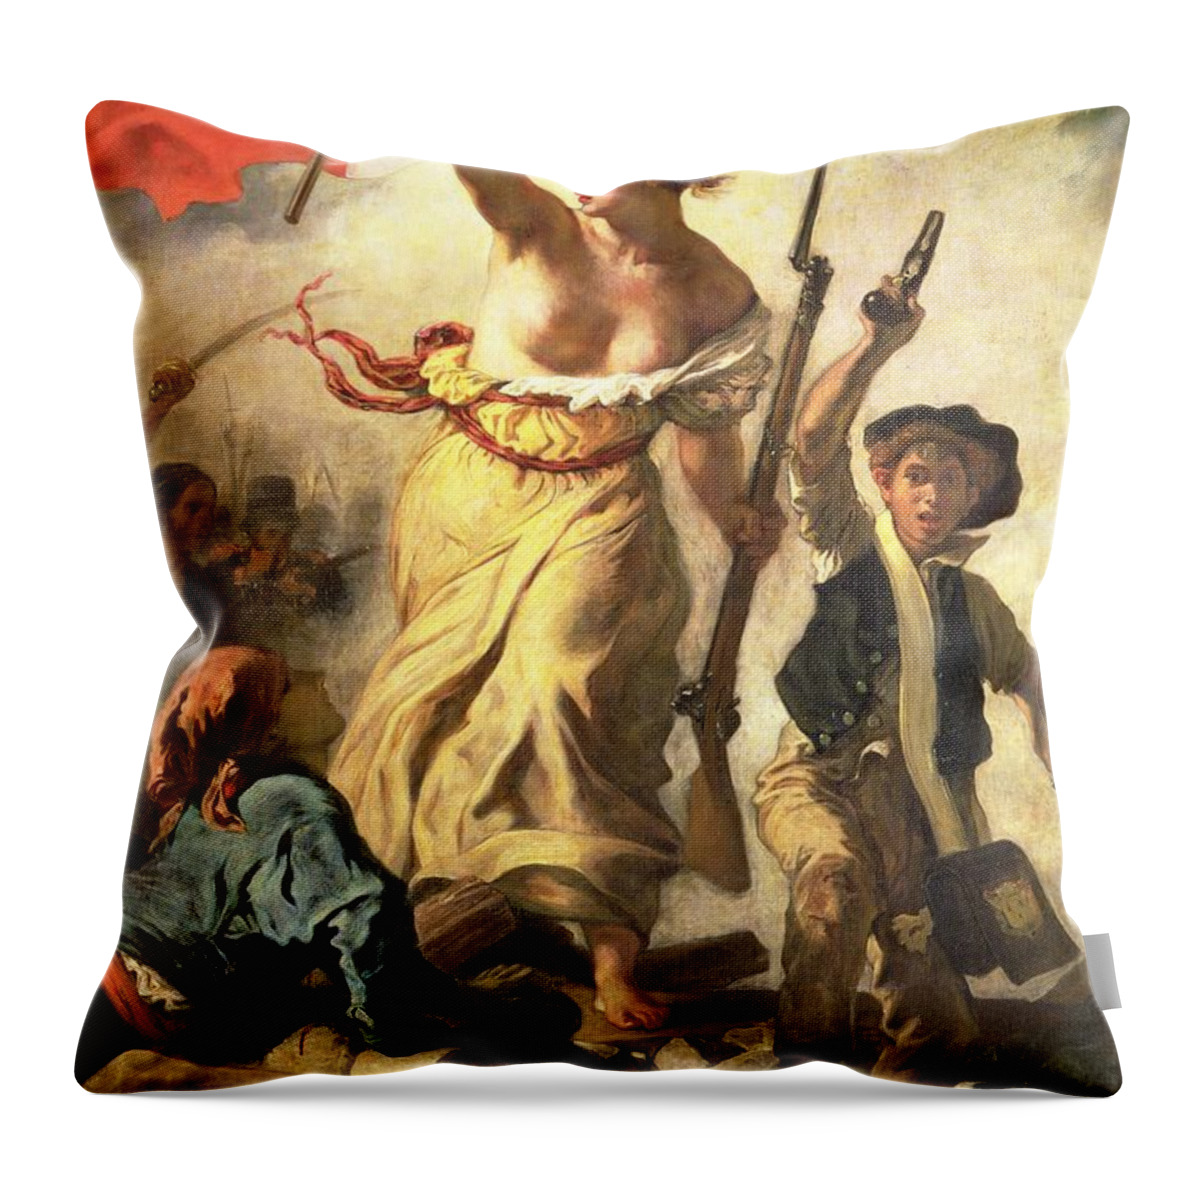 Personification; Female; Bare Breast; Soldier; Bayonet; National Flag; Revolution; Tricolour; Marianne; Freedom Throw Pillow featuring the painting Liberty Leading the People by Eugene Delacroix